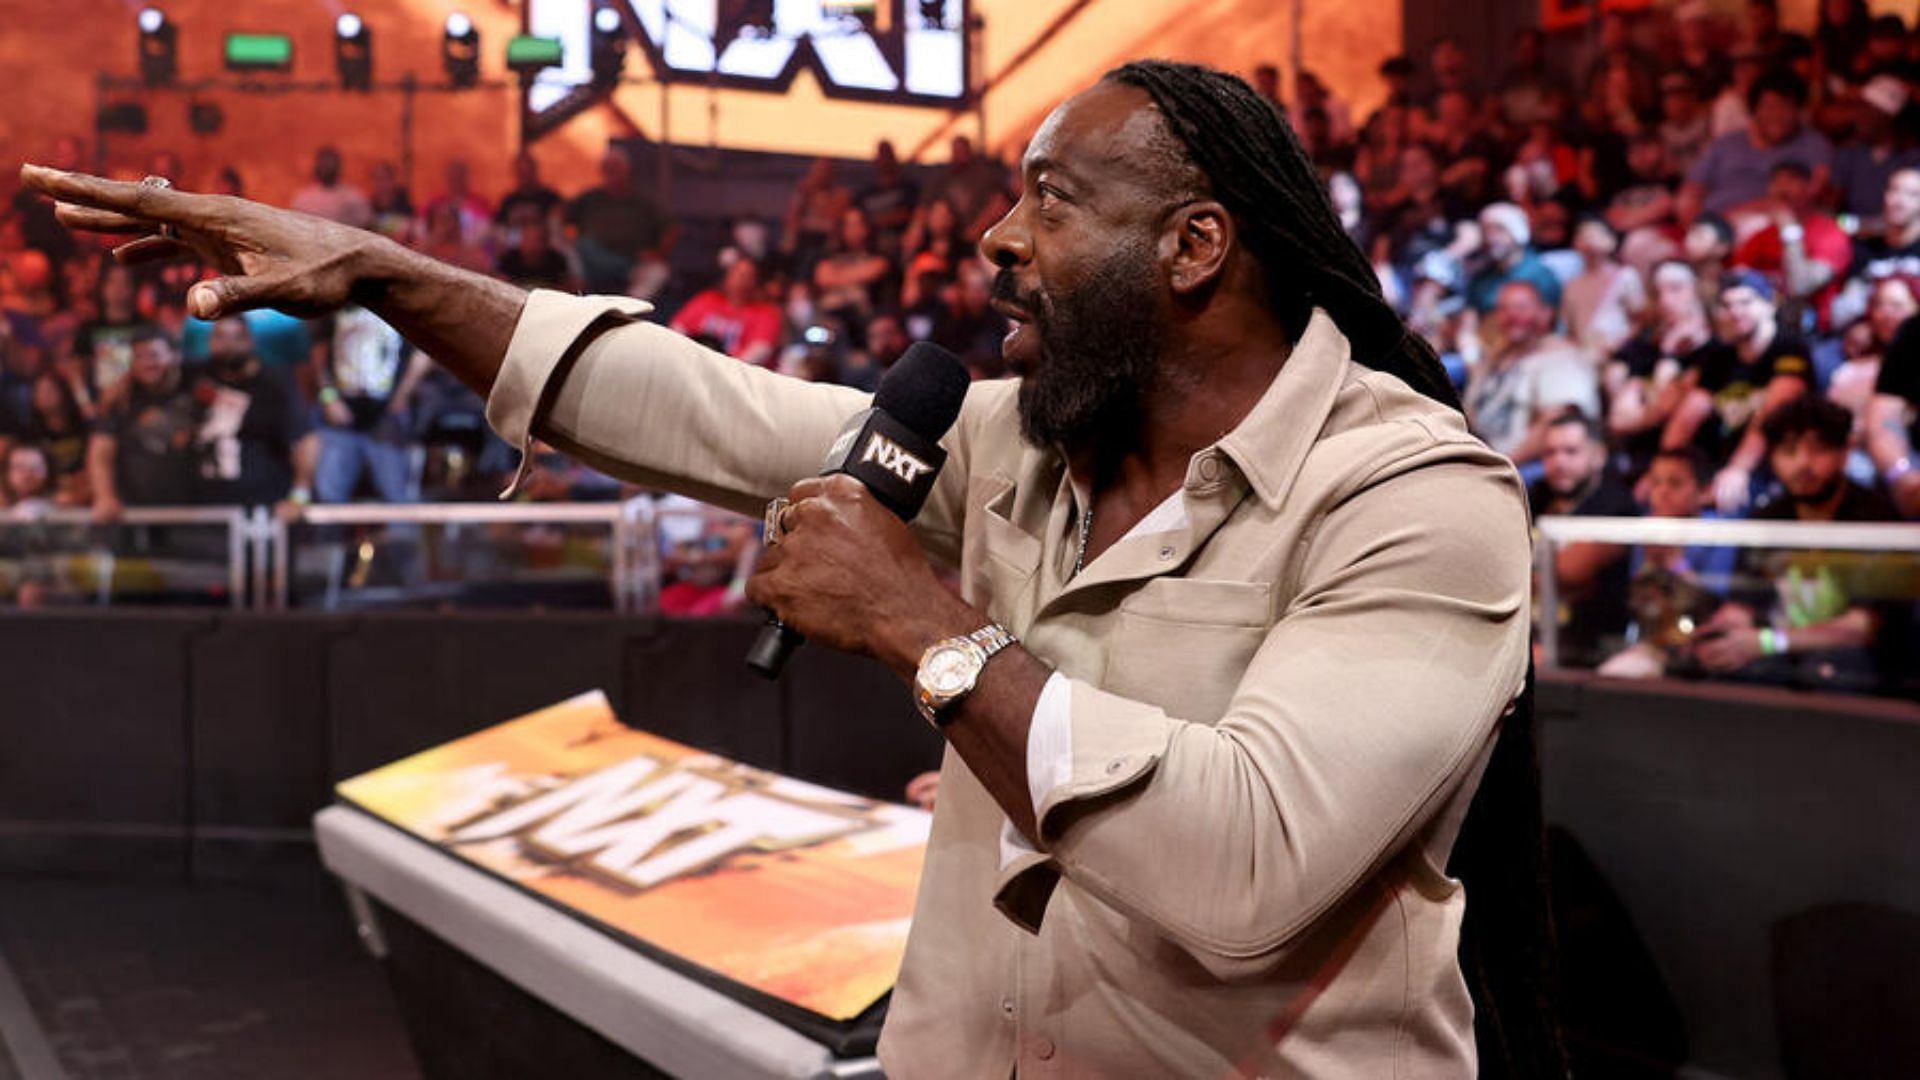 WWE legend and NXT commentator Booker T